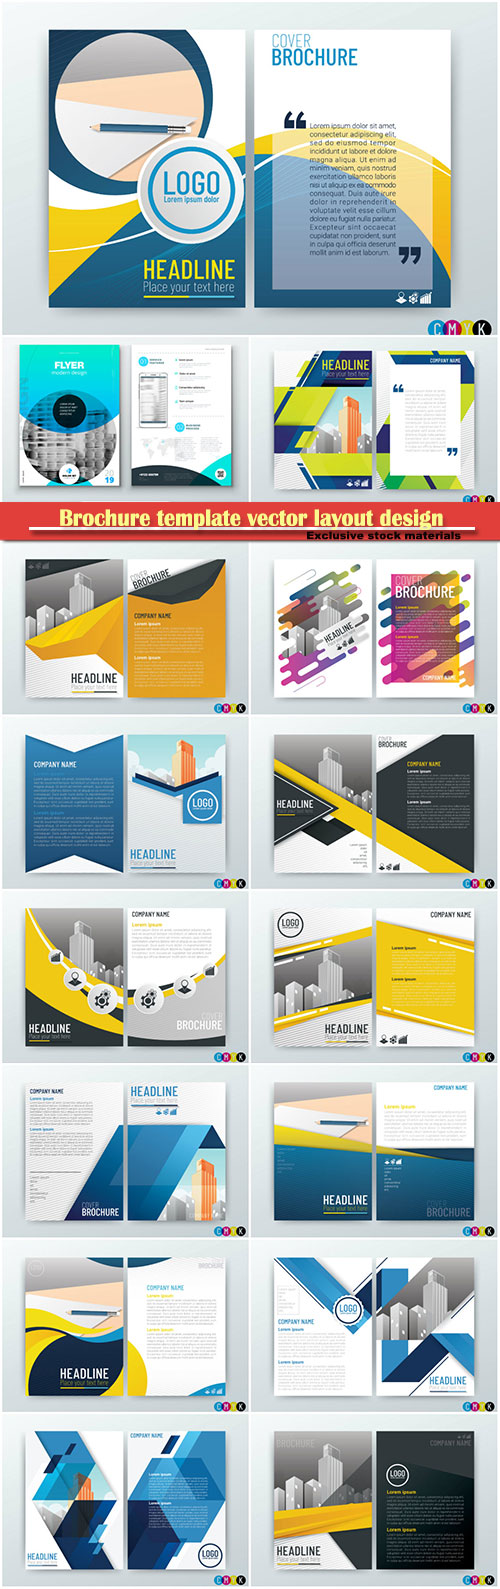 Brochure template vector layout design, corporate business annual report, magazine, flyer mockup # 154